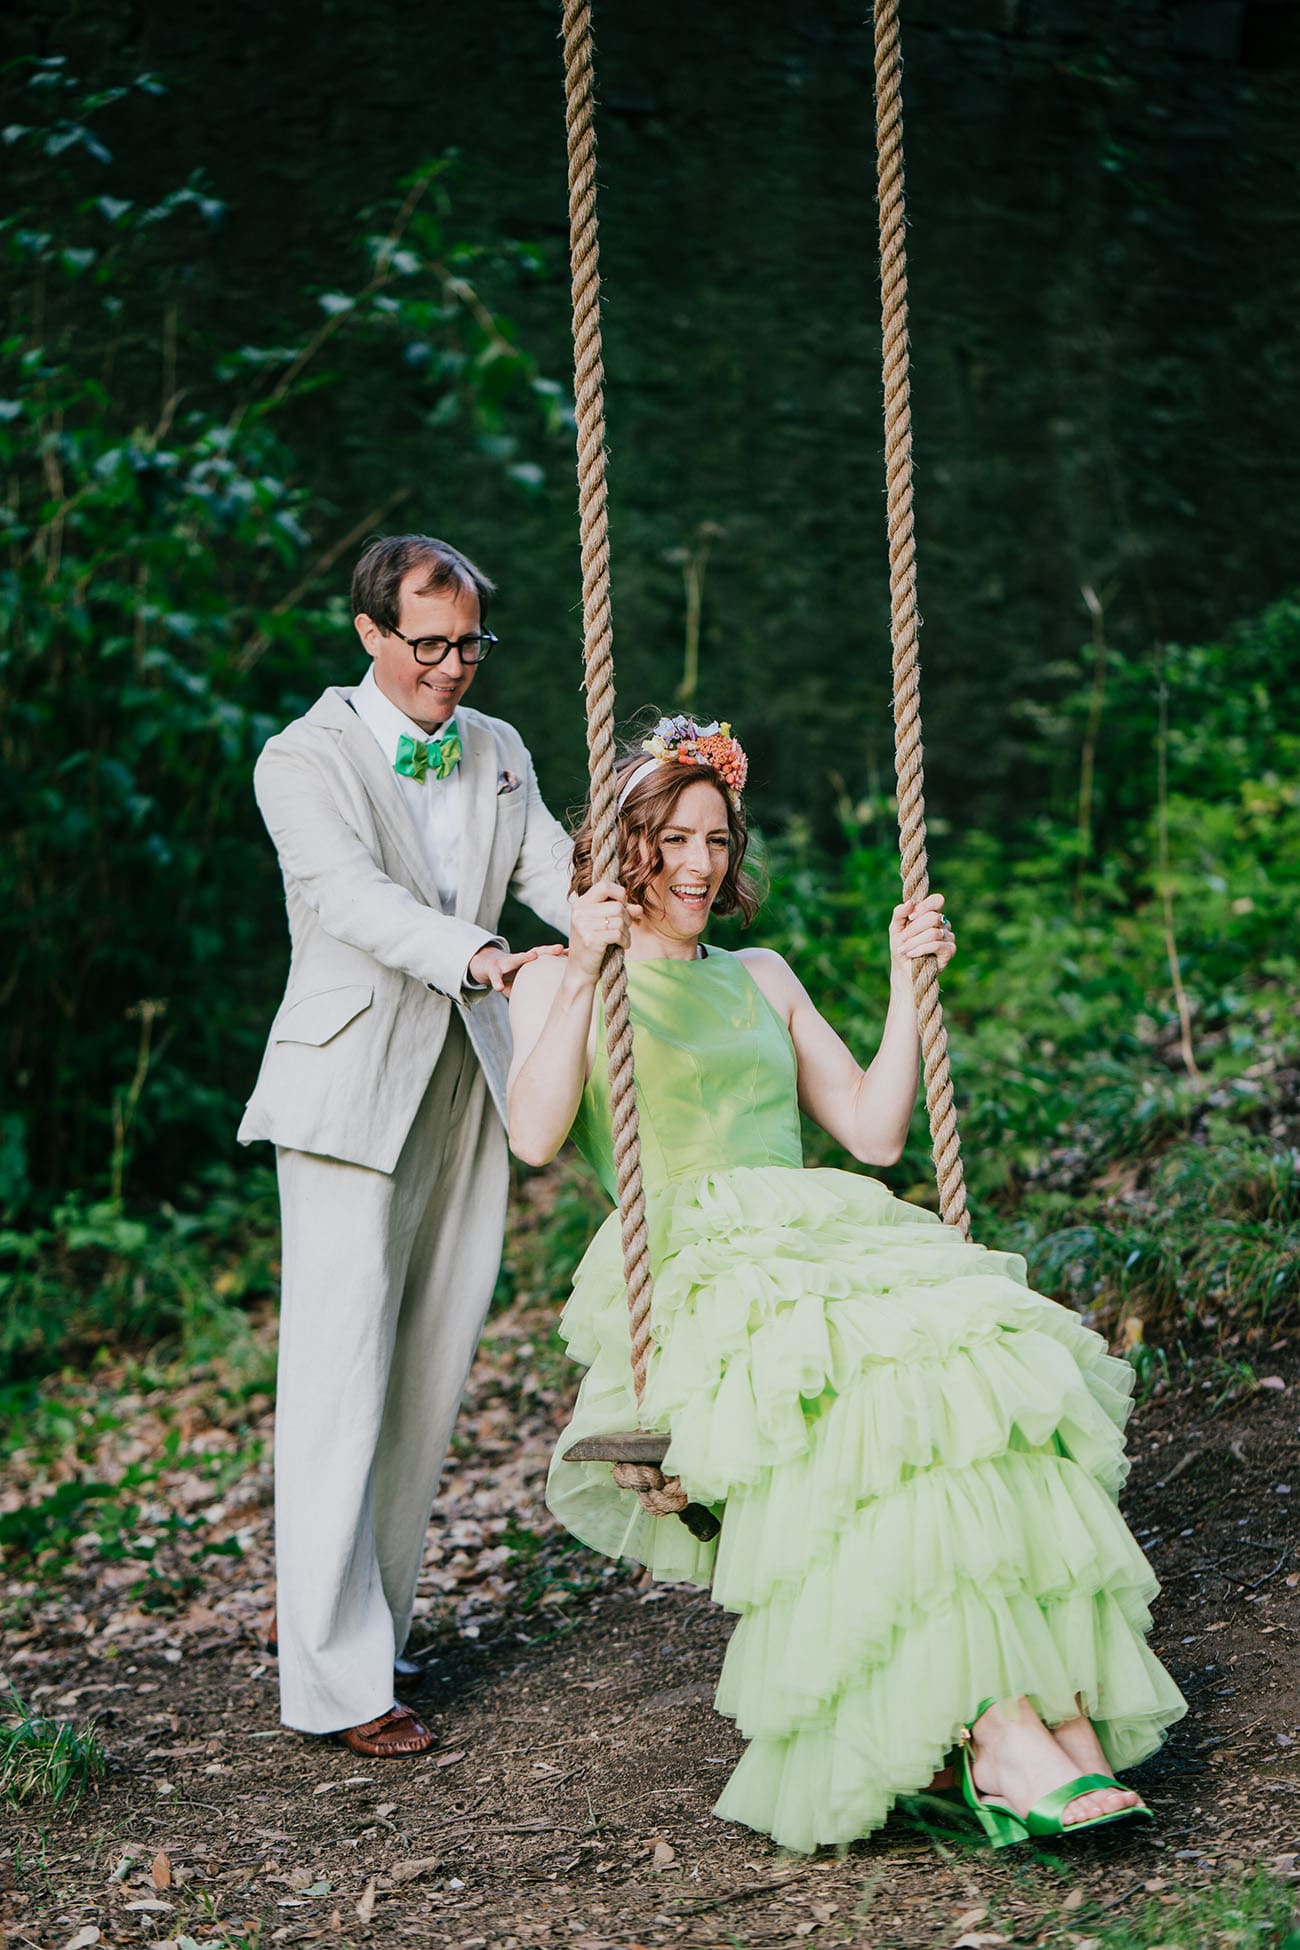 The groom pushes his smiling wife on a tree swing